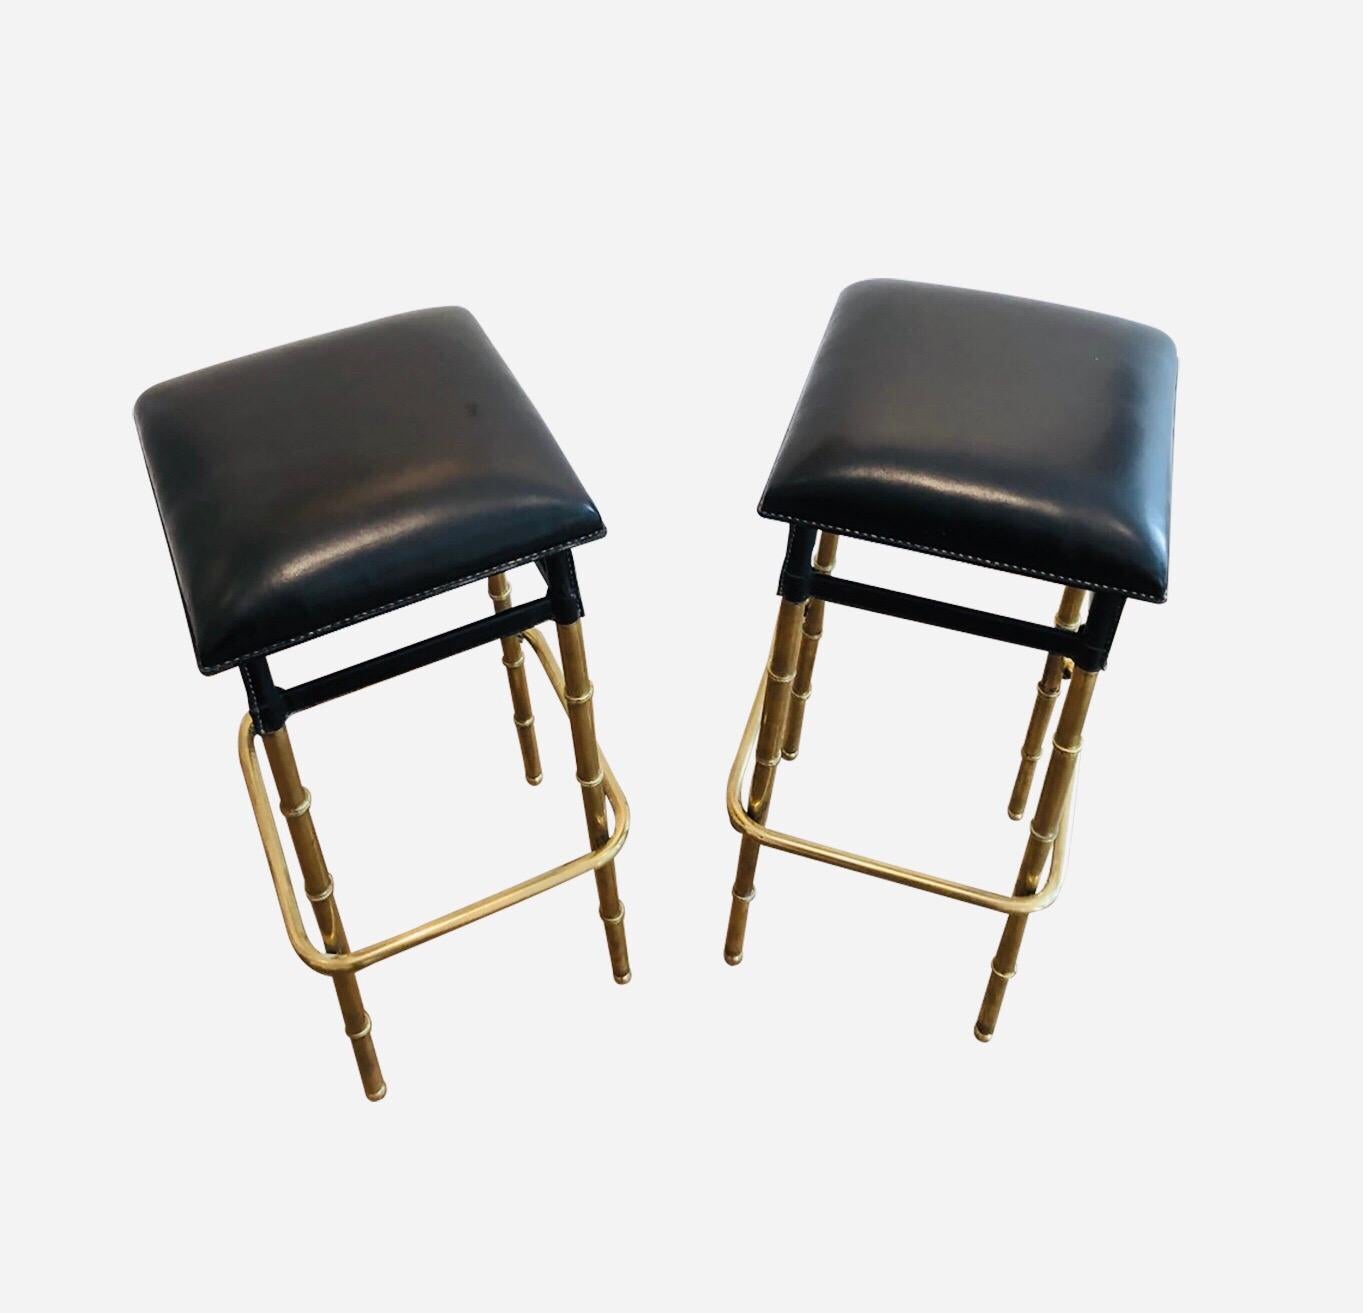 Mid-20th Century 1950s Jacques Adnet Pair of Black Leather Bar Stools Bamboo Style For Sale